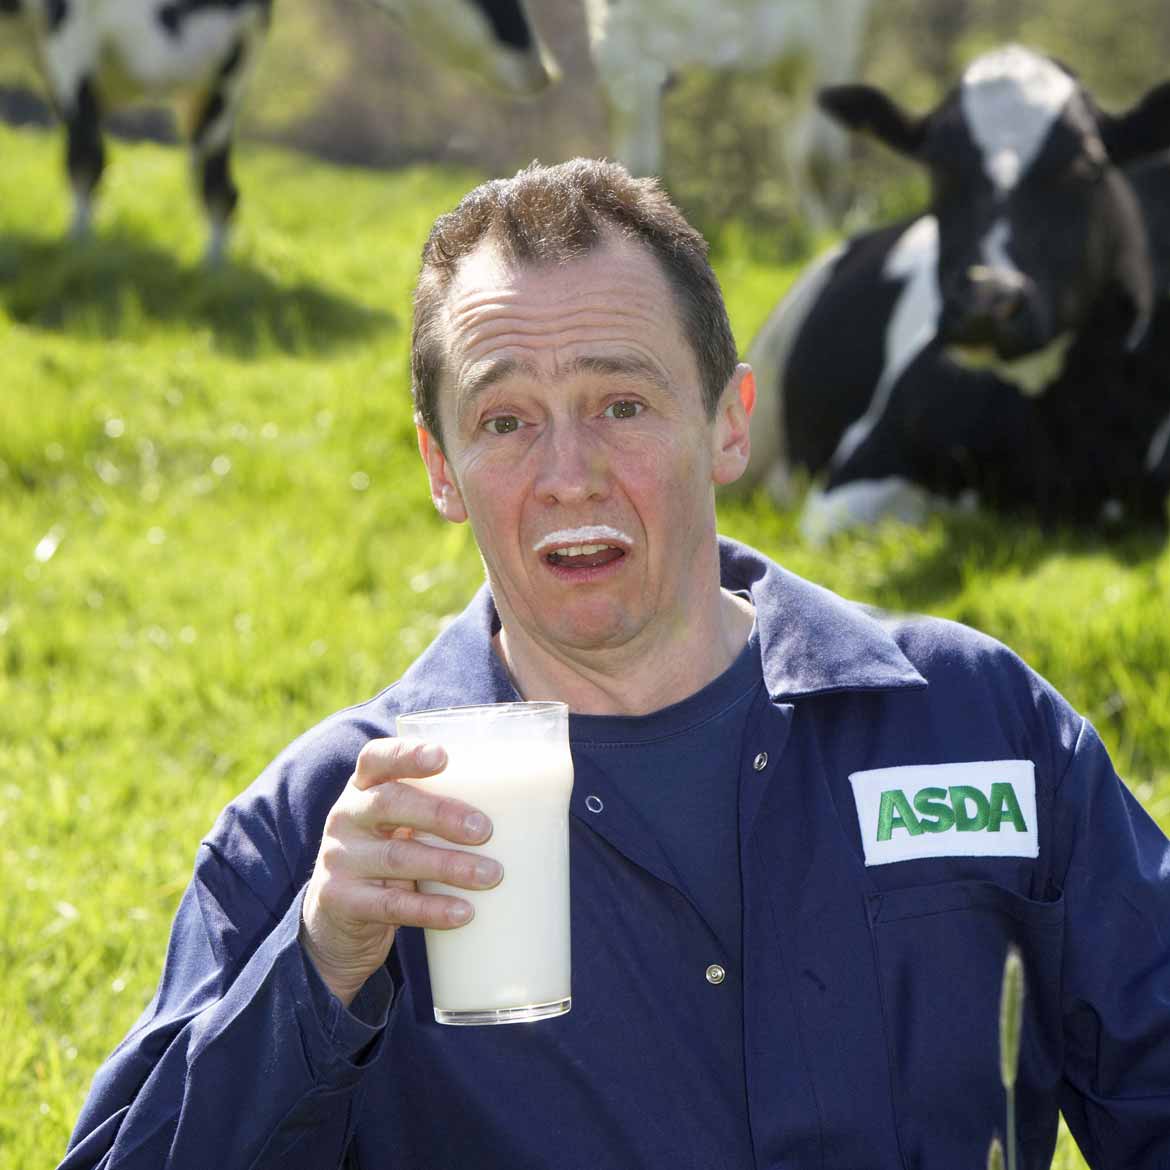 Paul Whitehouse has a milk moustache in a TV advert for ASDA